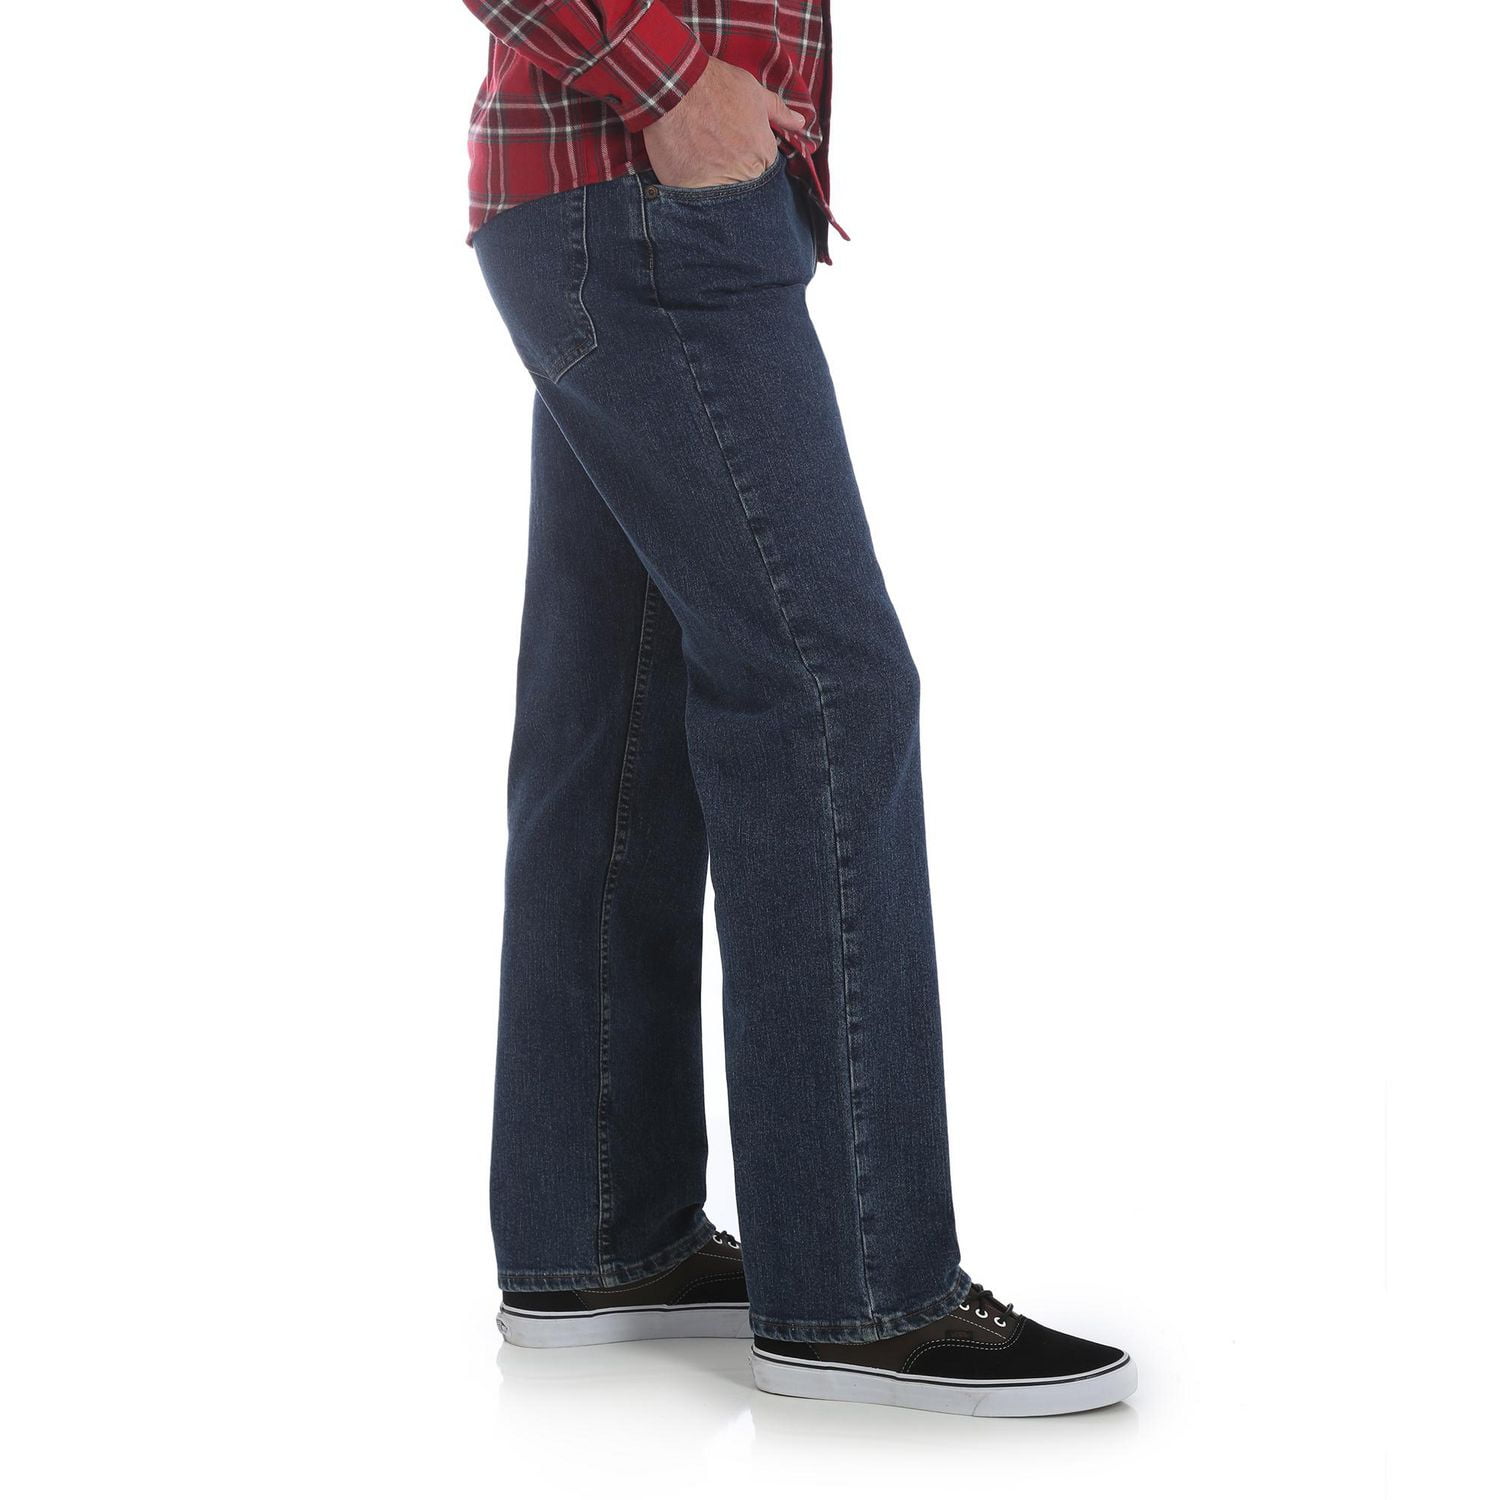 Men's Relaxed Fit Jeans - Performance Comfort - KEY Apparel